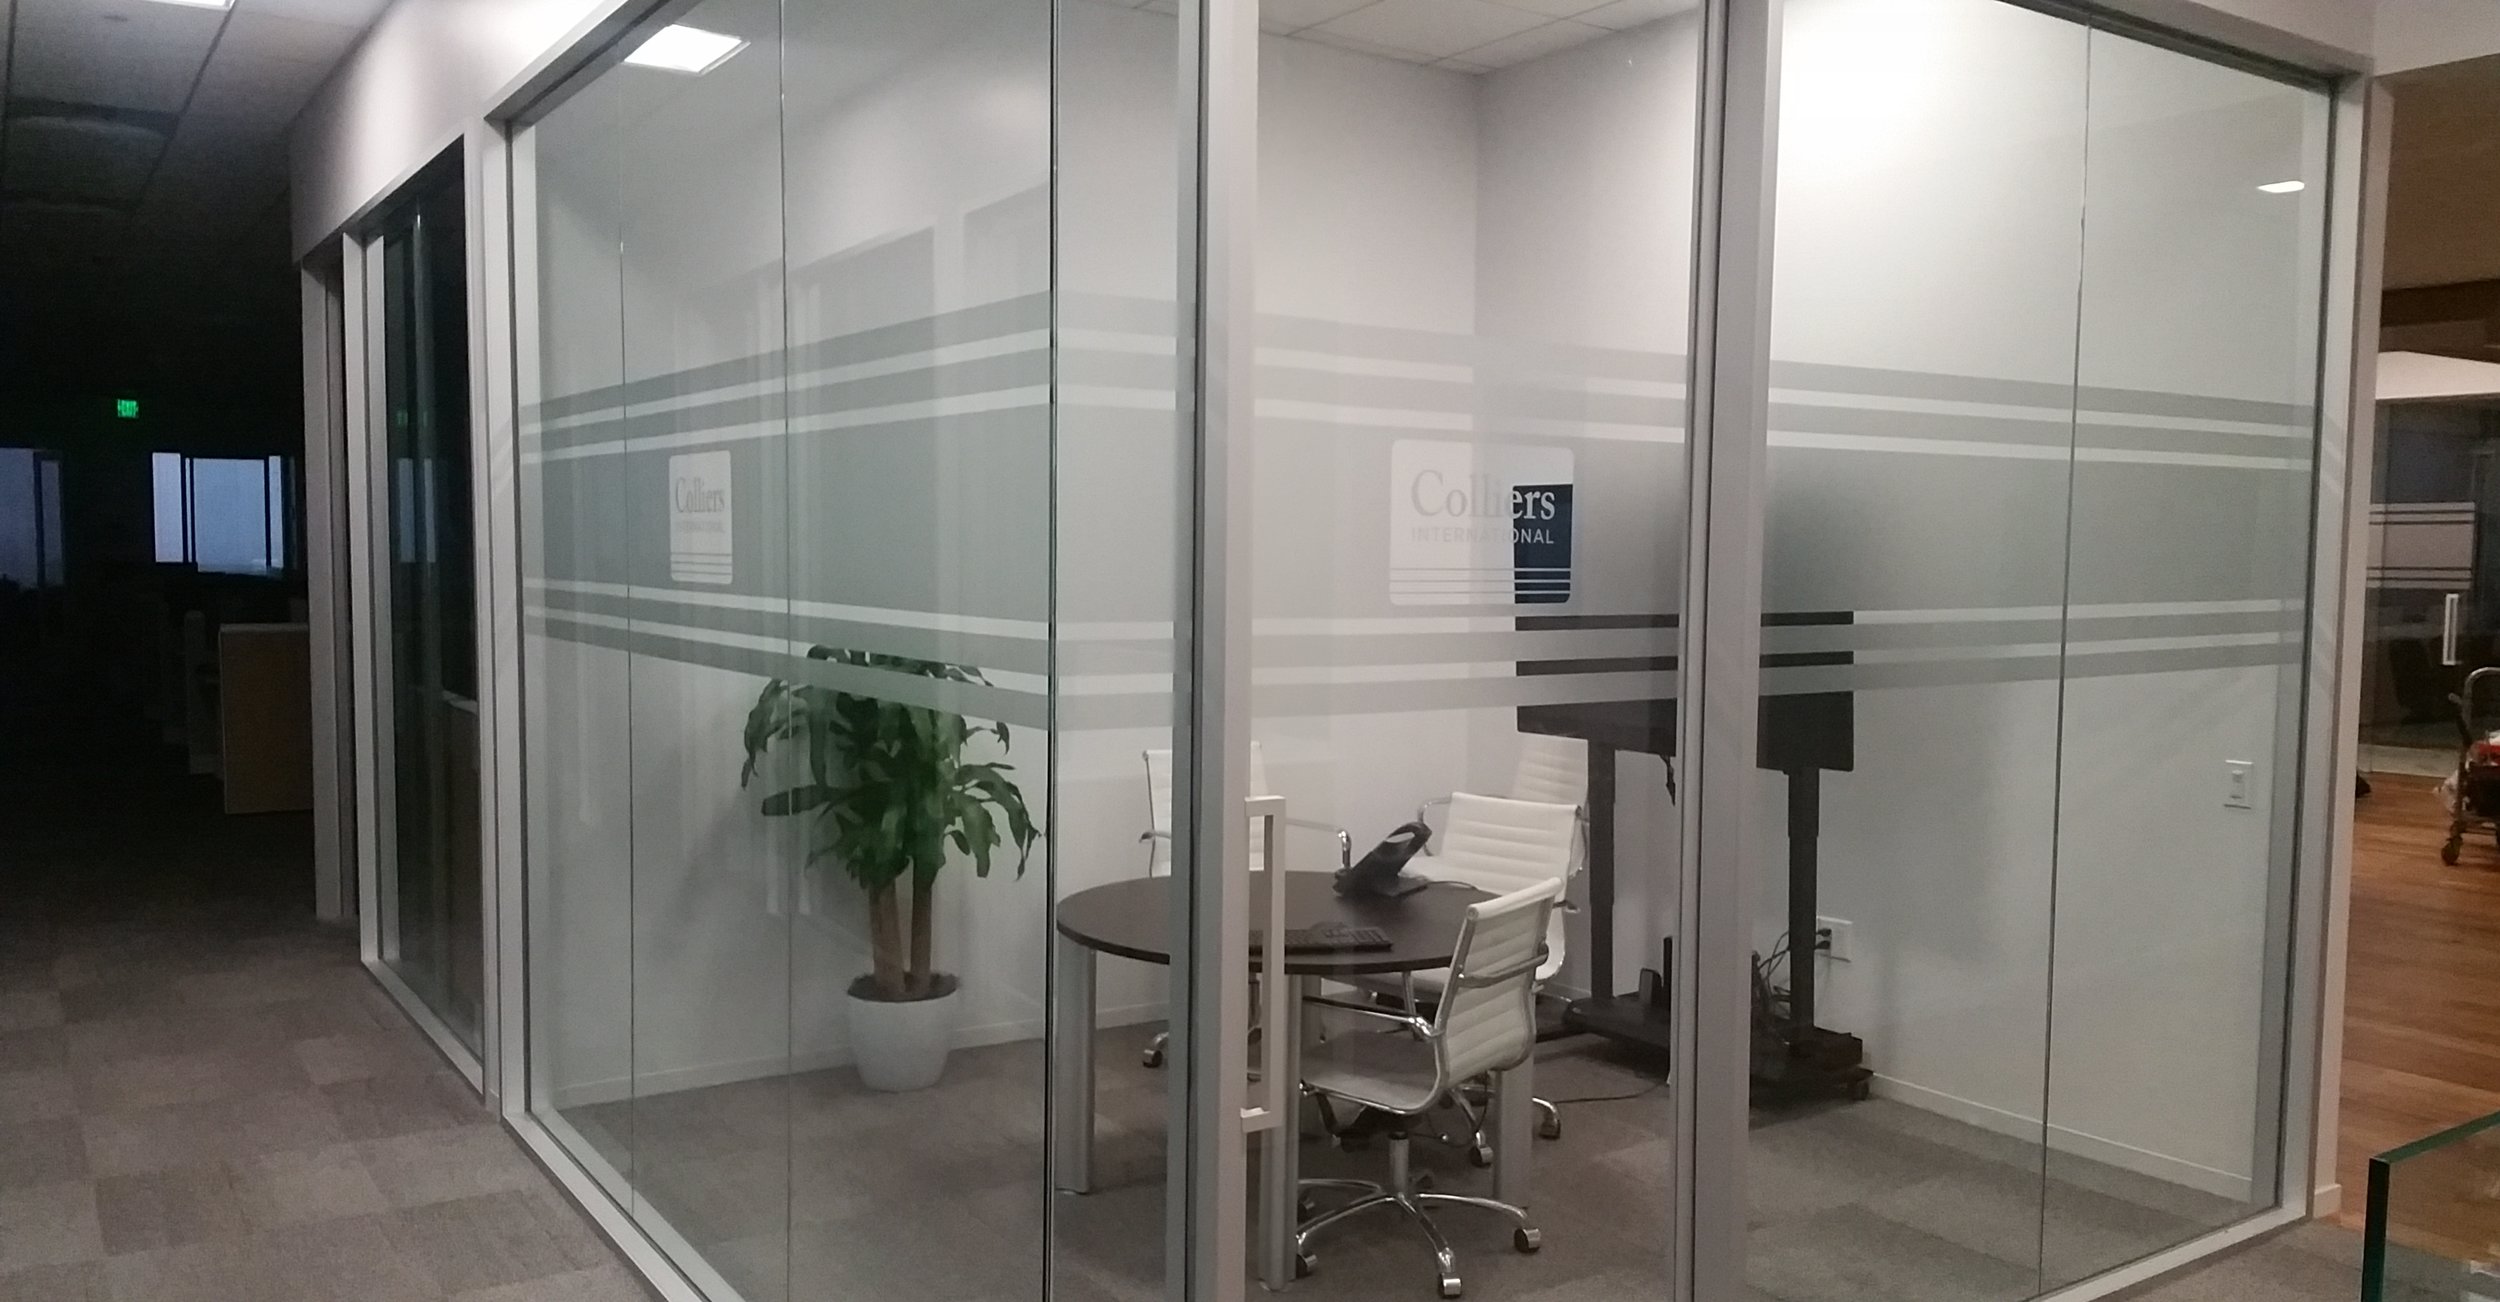 Colliers International office privacy-safety etch vinyl